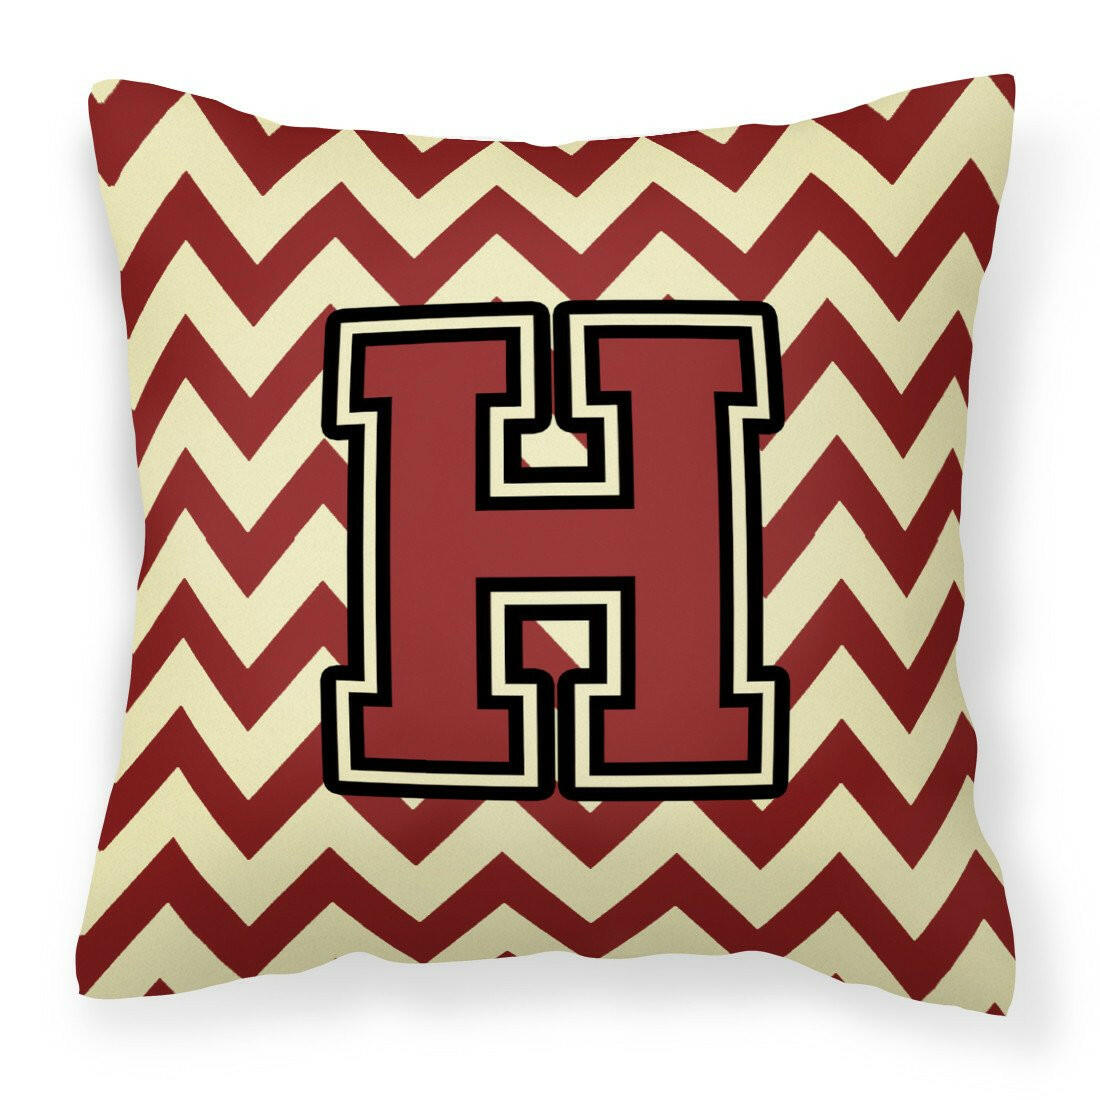 Letter H Chevron Maroon and Gold Fabric Decorative Pillow CJ1061-HPW1414 by Caroline's Treasures